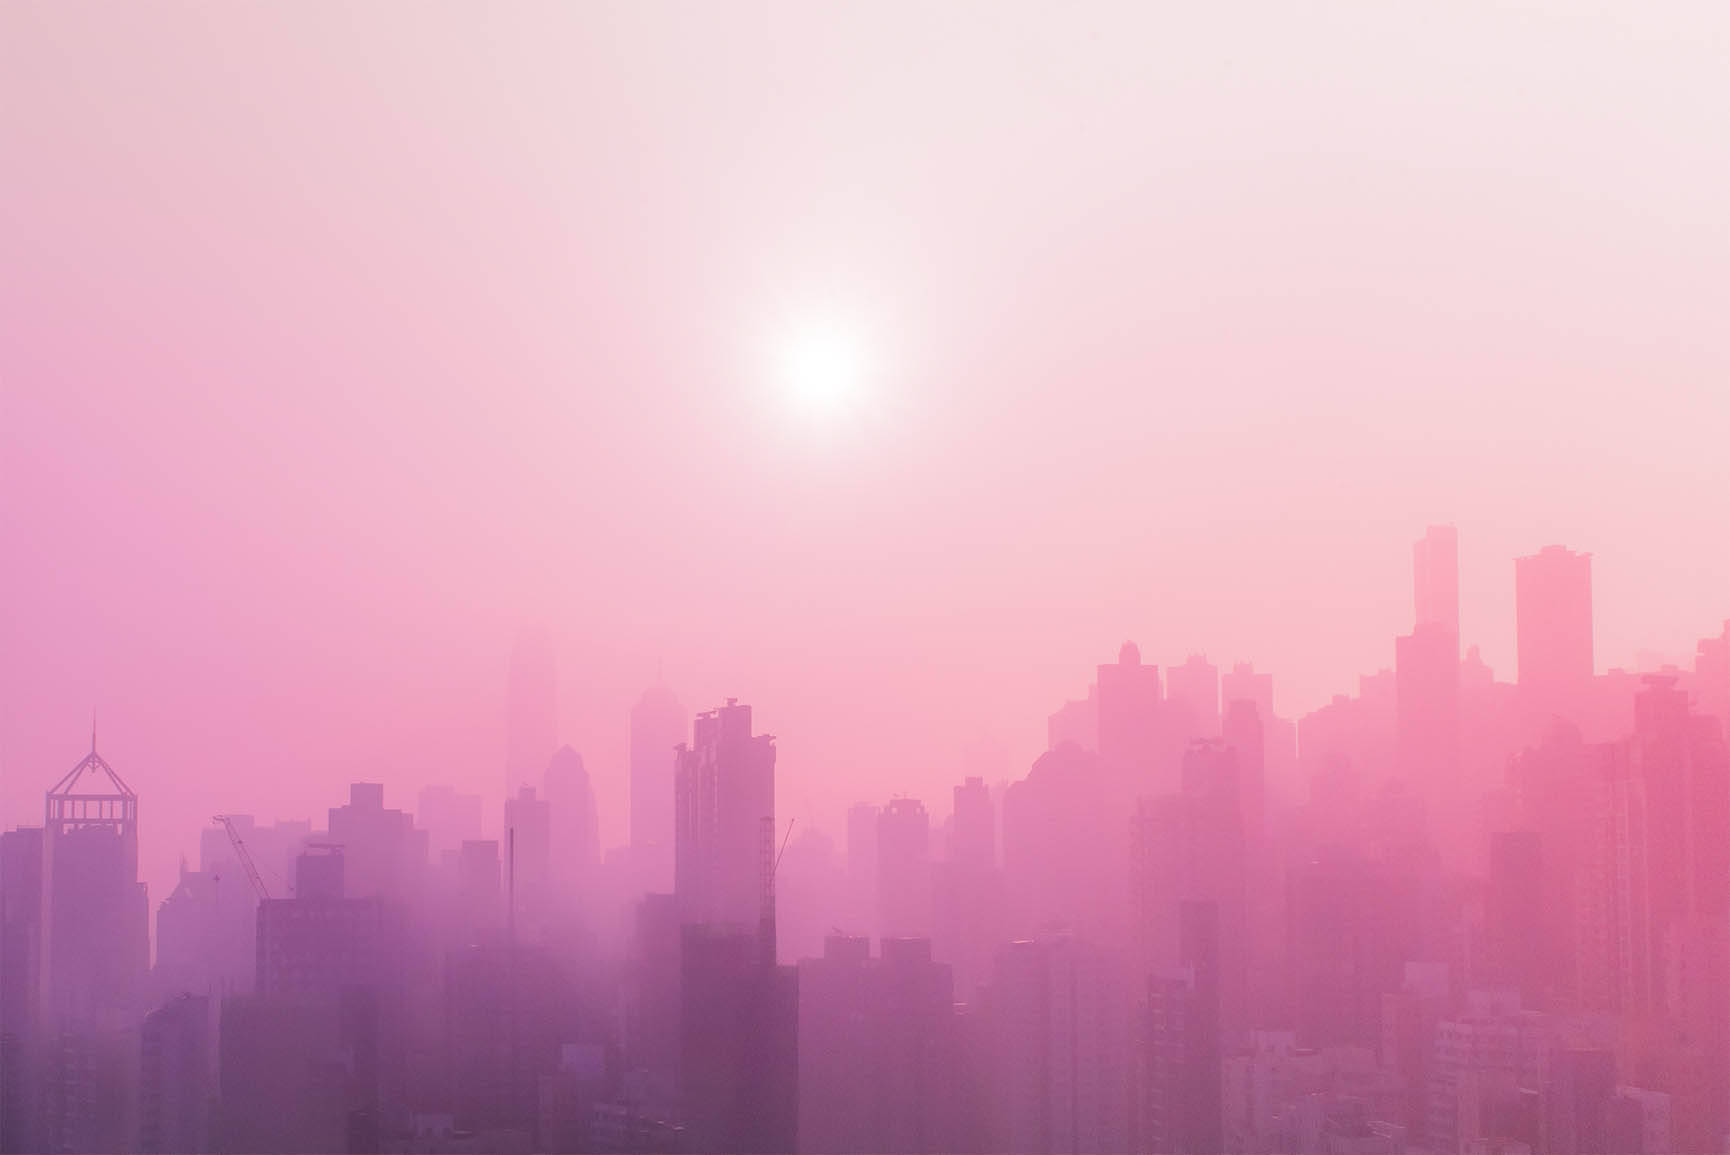 Aesthetic Pink Preppy City Background